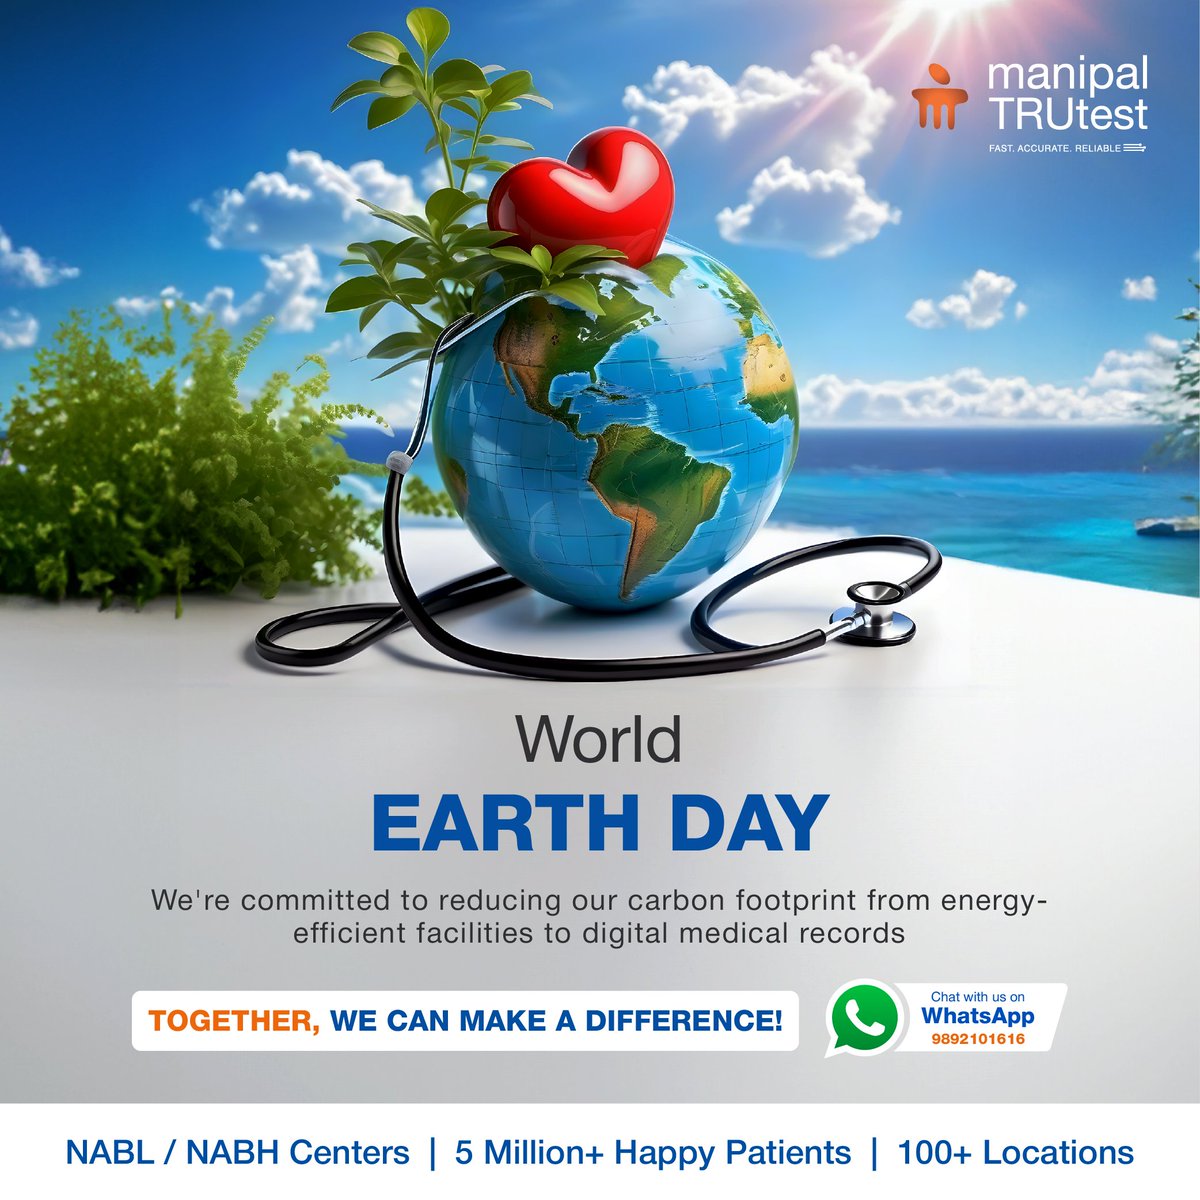 Manipal TRUtest prioritizes your health and the planet. Our eco-friendly practices minimize environmental impact while offering top-notch diagnostic services.
Explore our services! Click: shorturl.at/enL03

#EarthDay #bloodtest #basichealthcheckpackage #ManipalTrutest